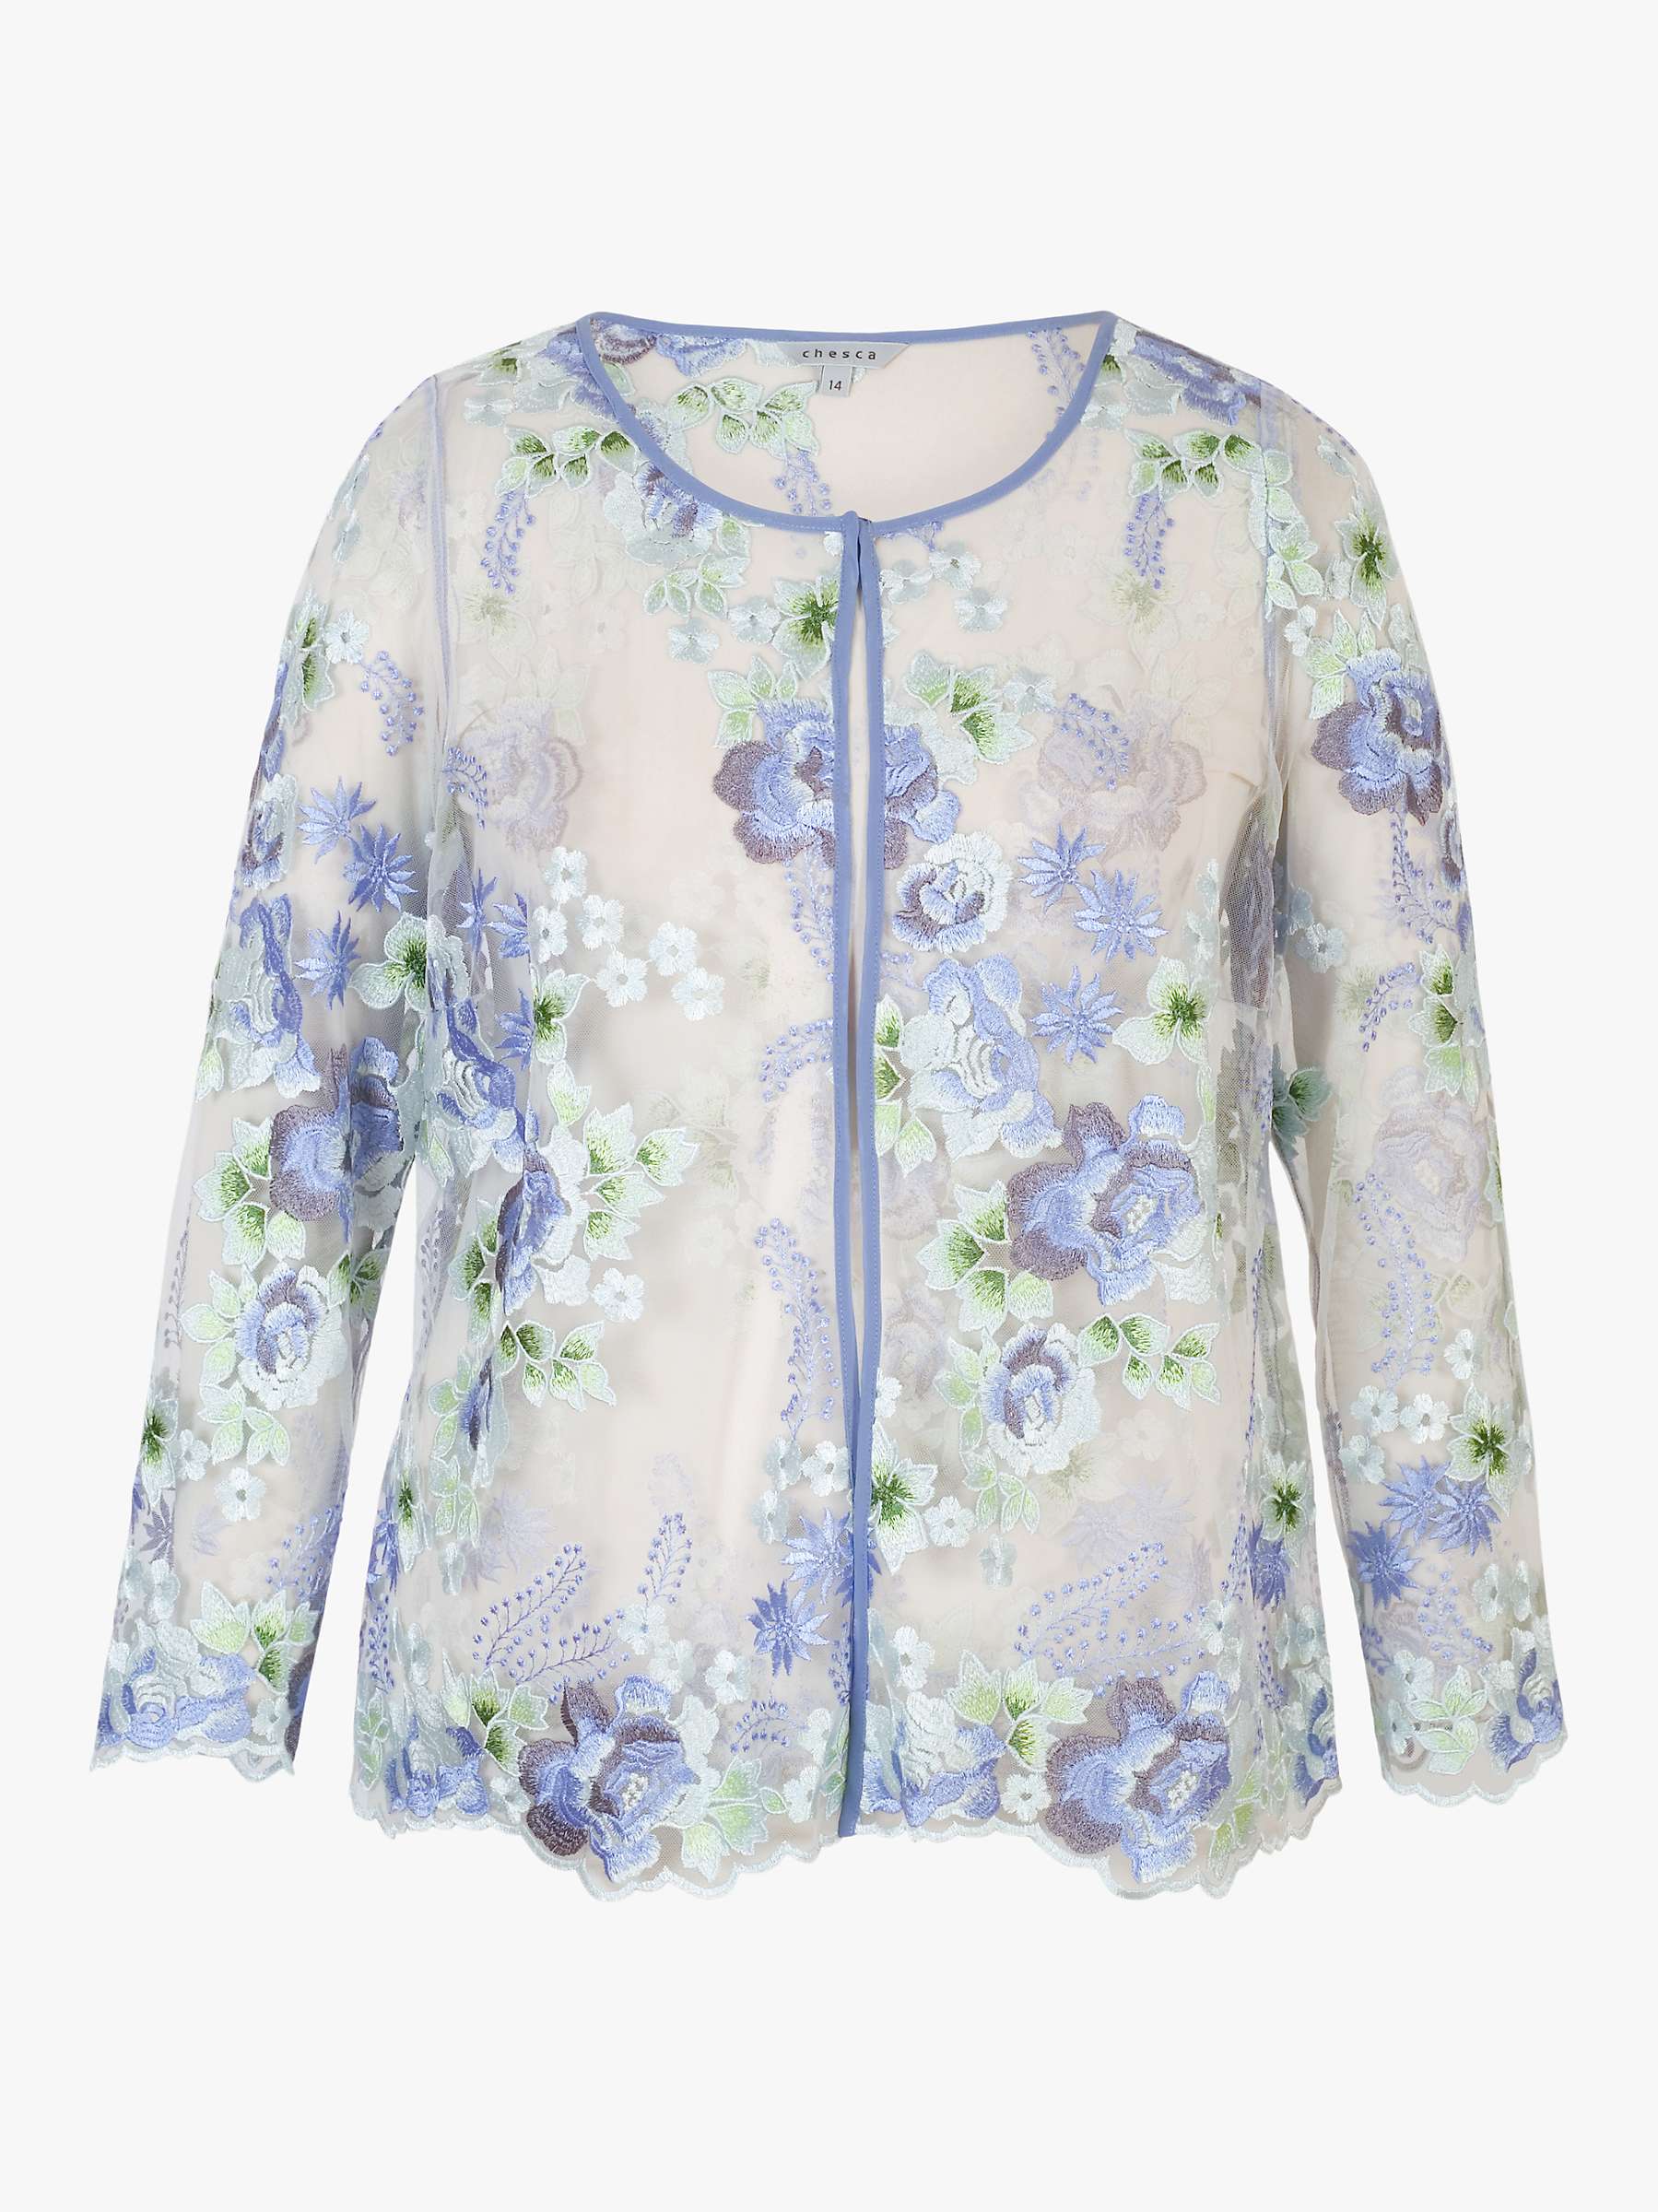 Buy chesca Bluebell Floral Jacket, Bluebell Online at johnlewis.com